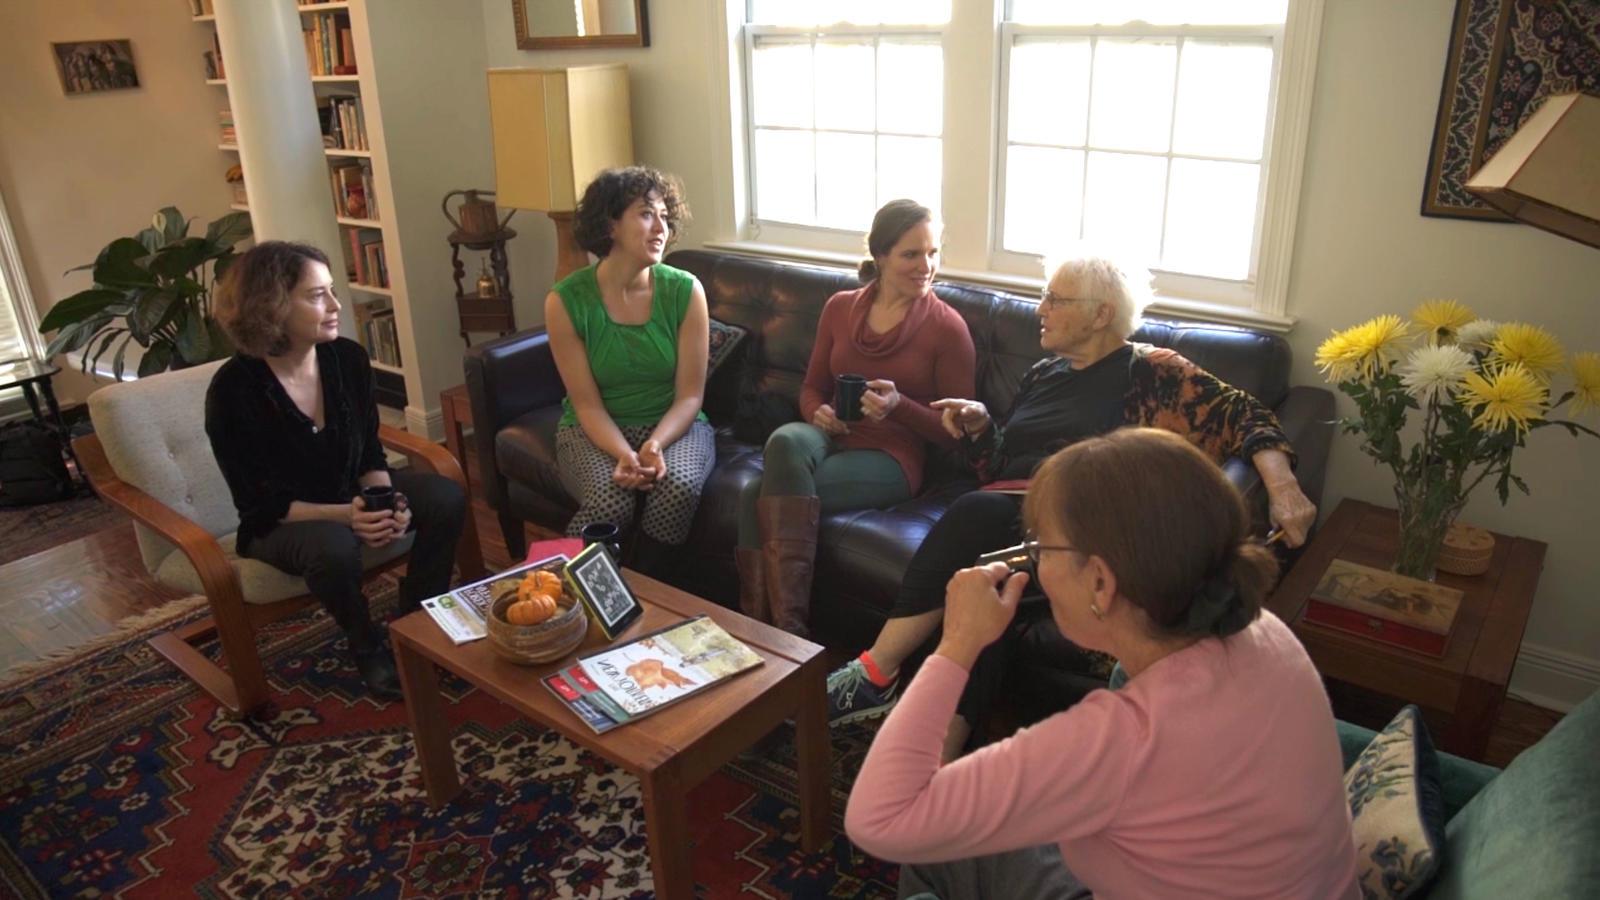 Several women of different ages seated in a living room